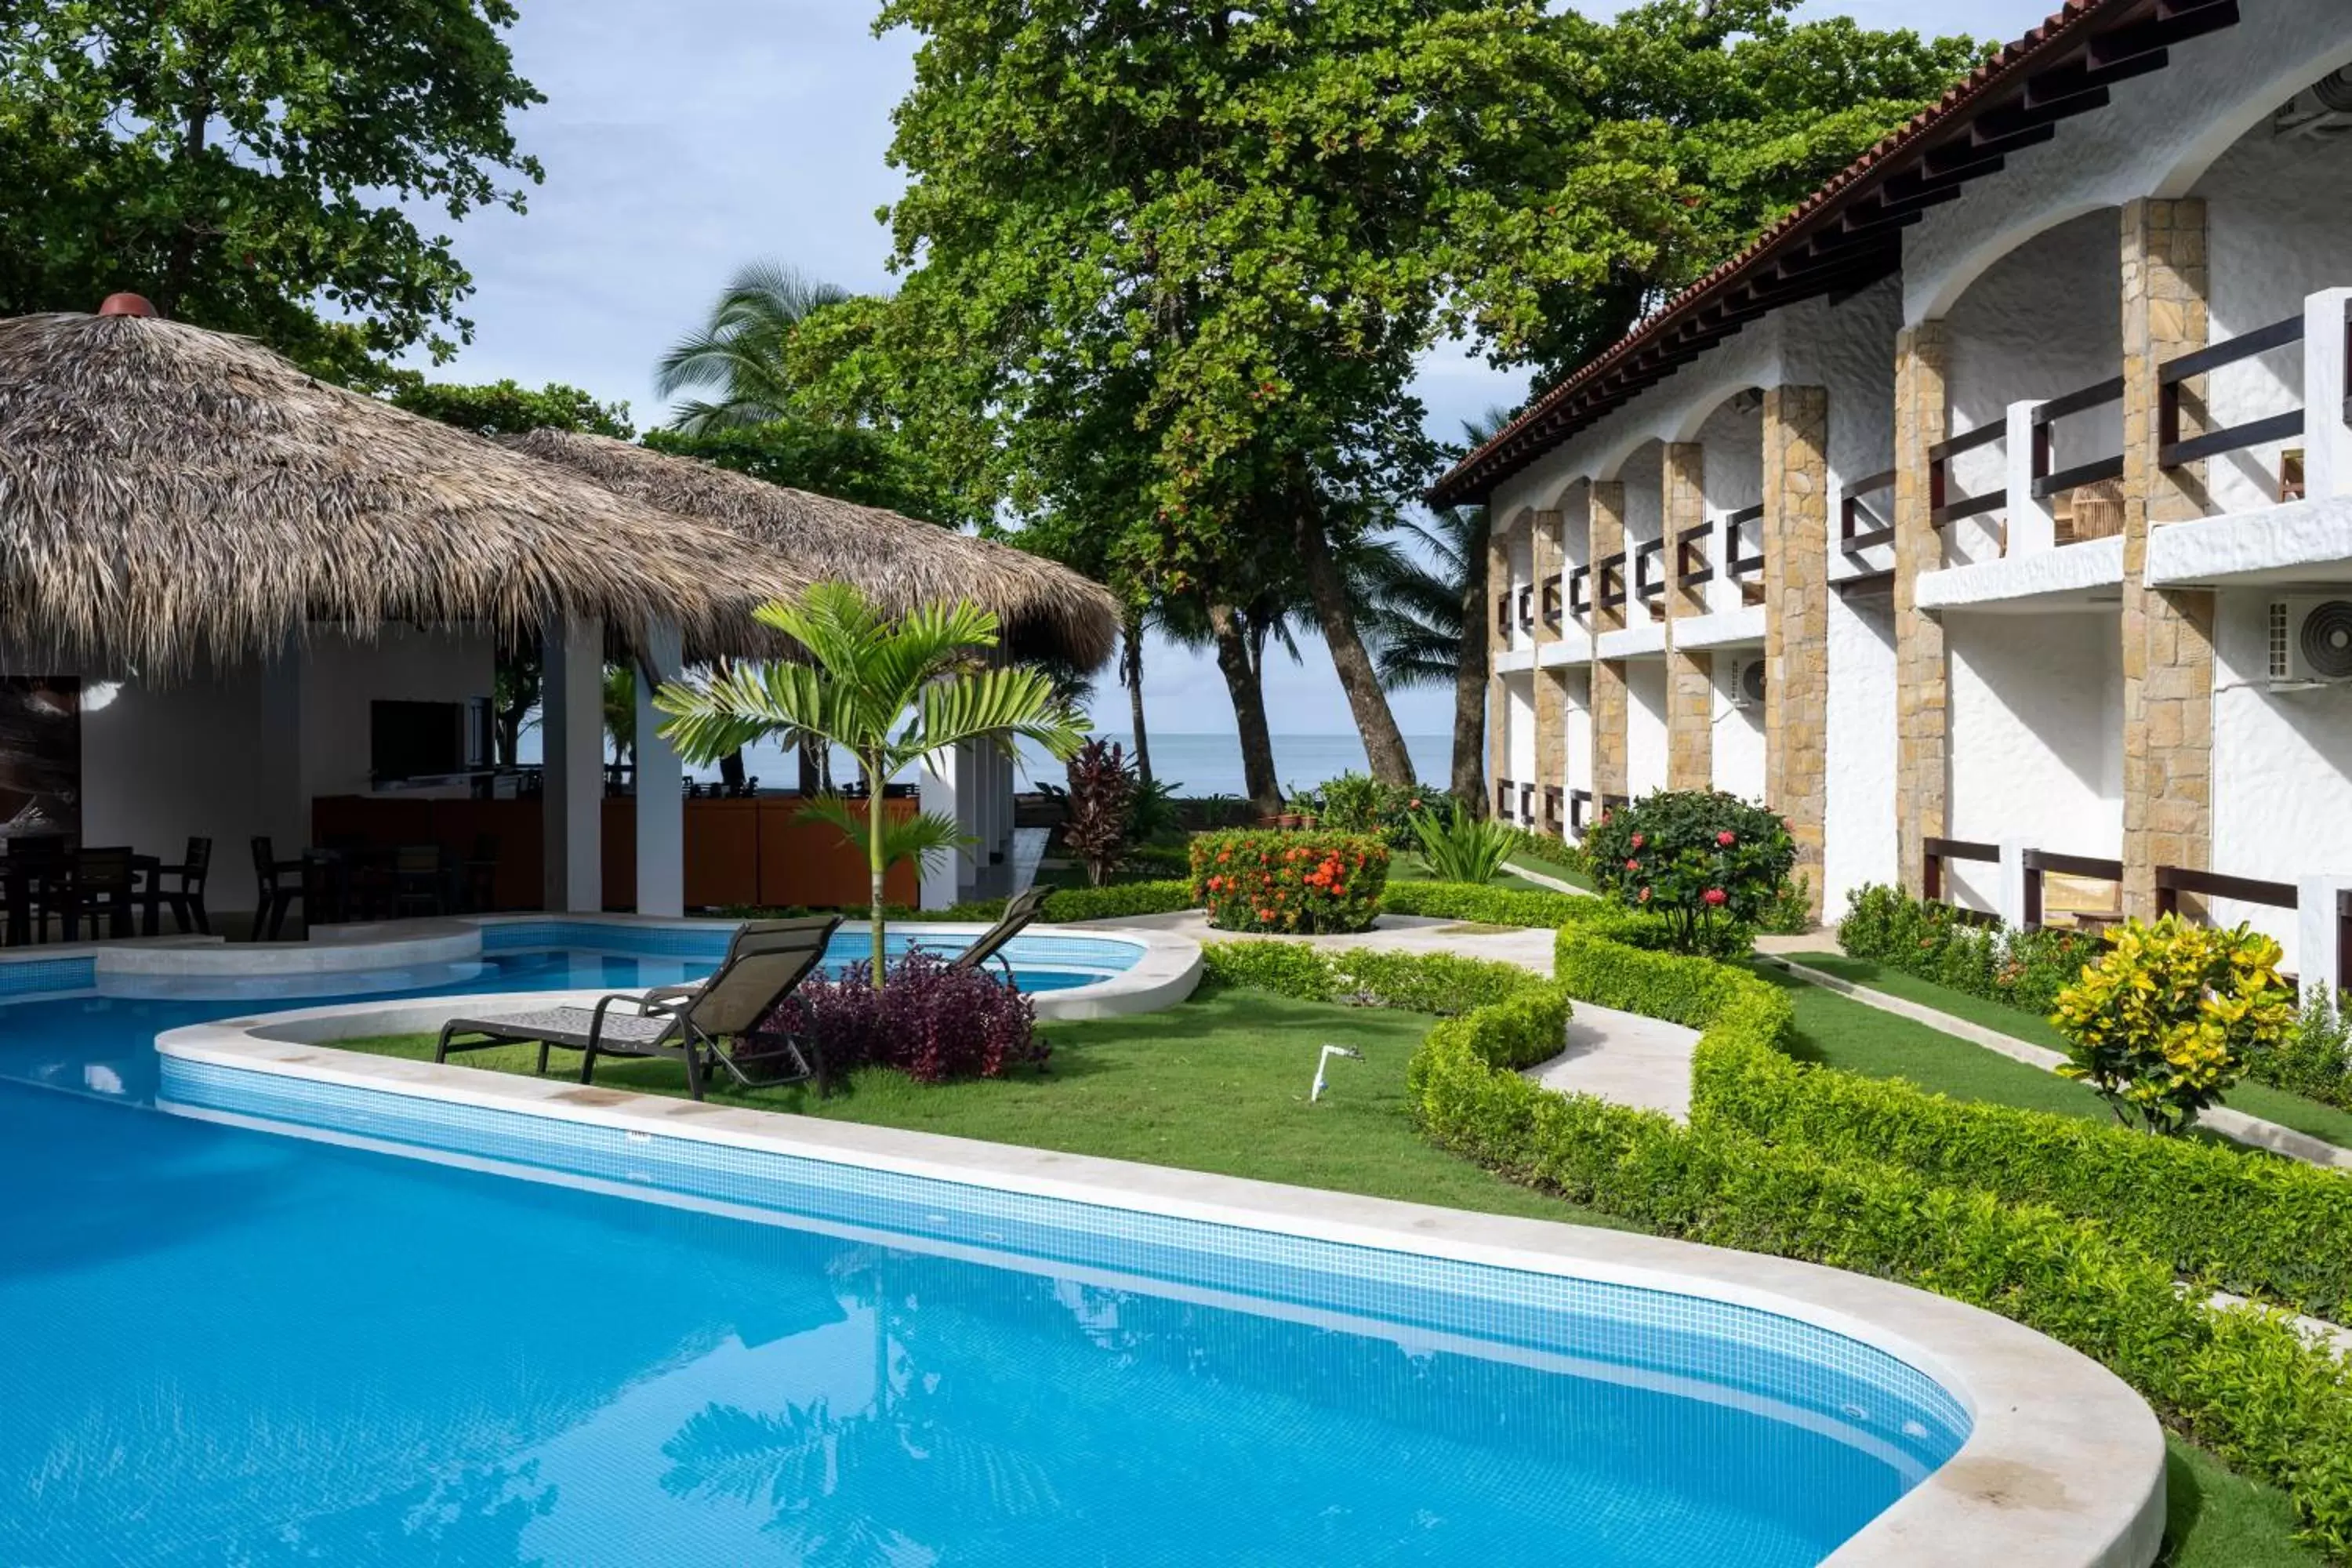 Swimming pool, Property Building in Fuego del Sol Beachfront Hotel